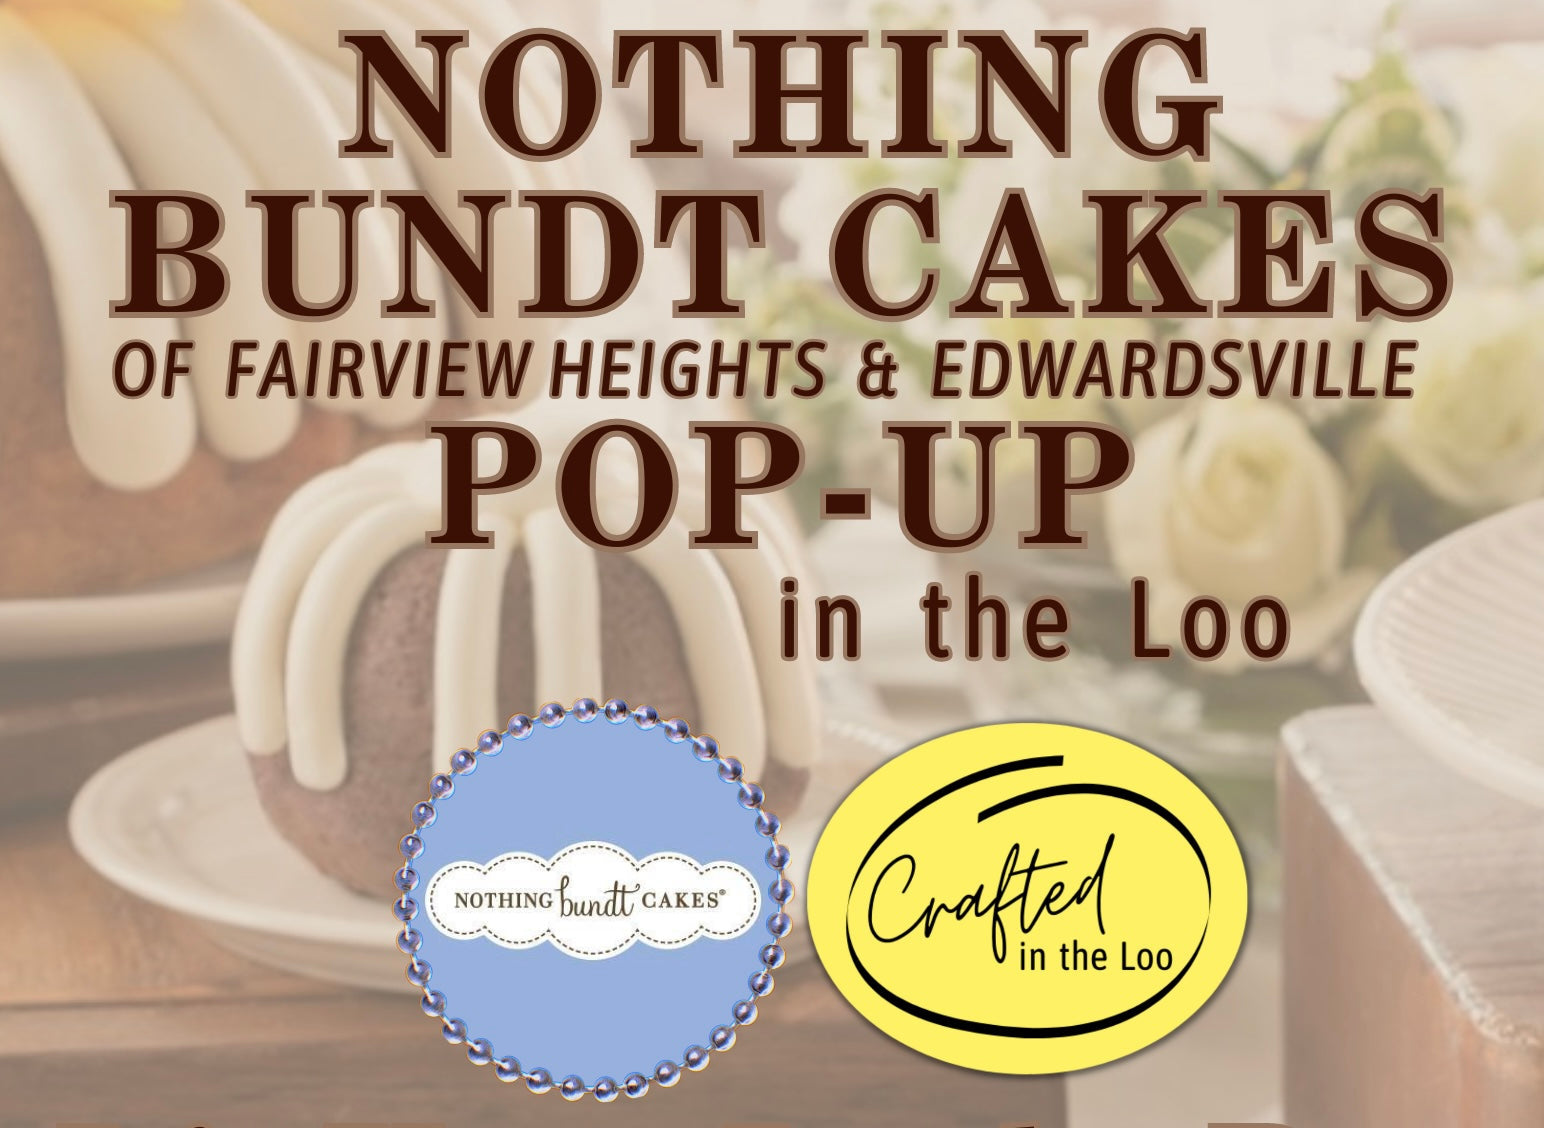 May 18th - Firebird Fest Day - Nothing Bundt Cakes @ Crafted in the Loo Preorder - Pop-up Day